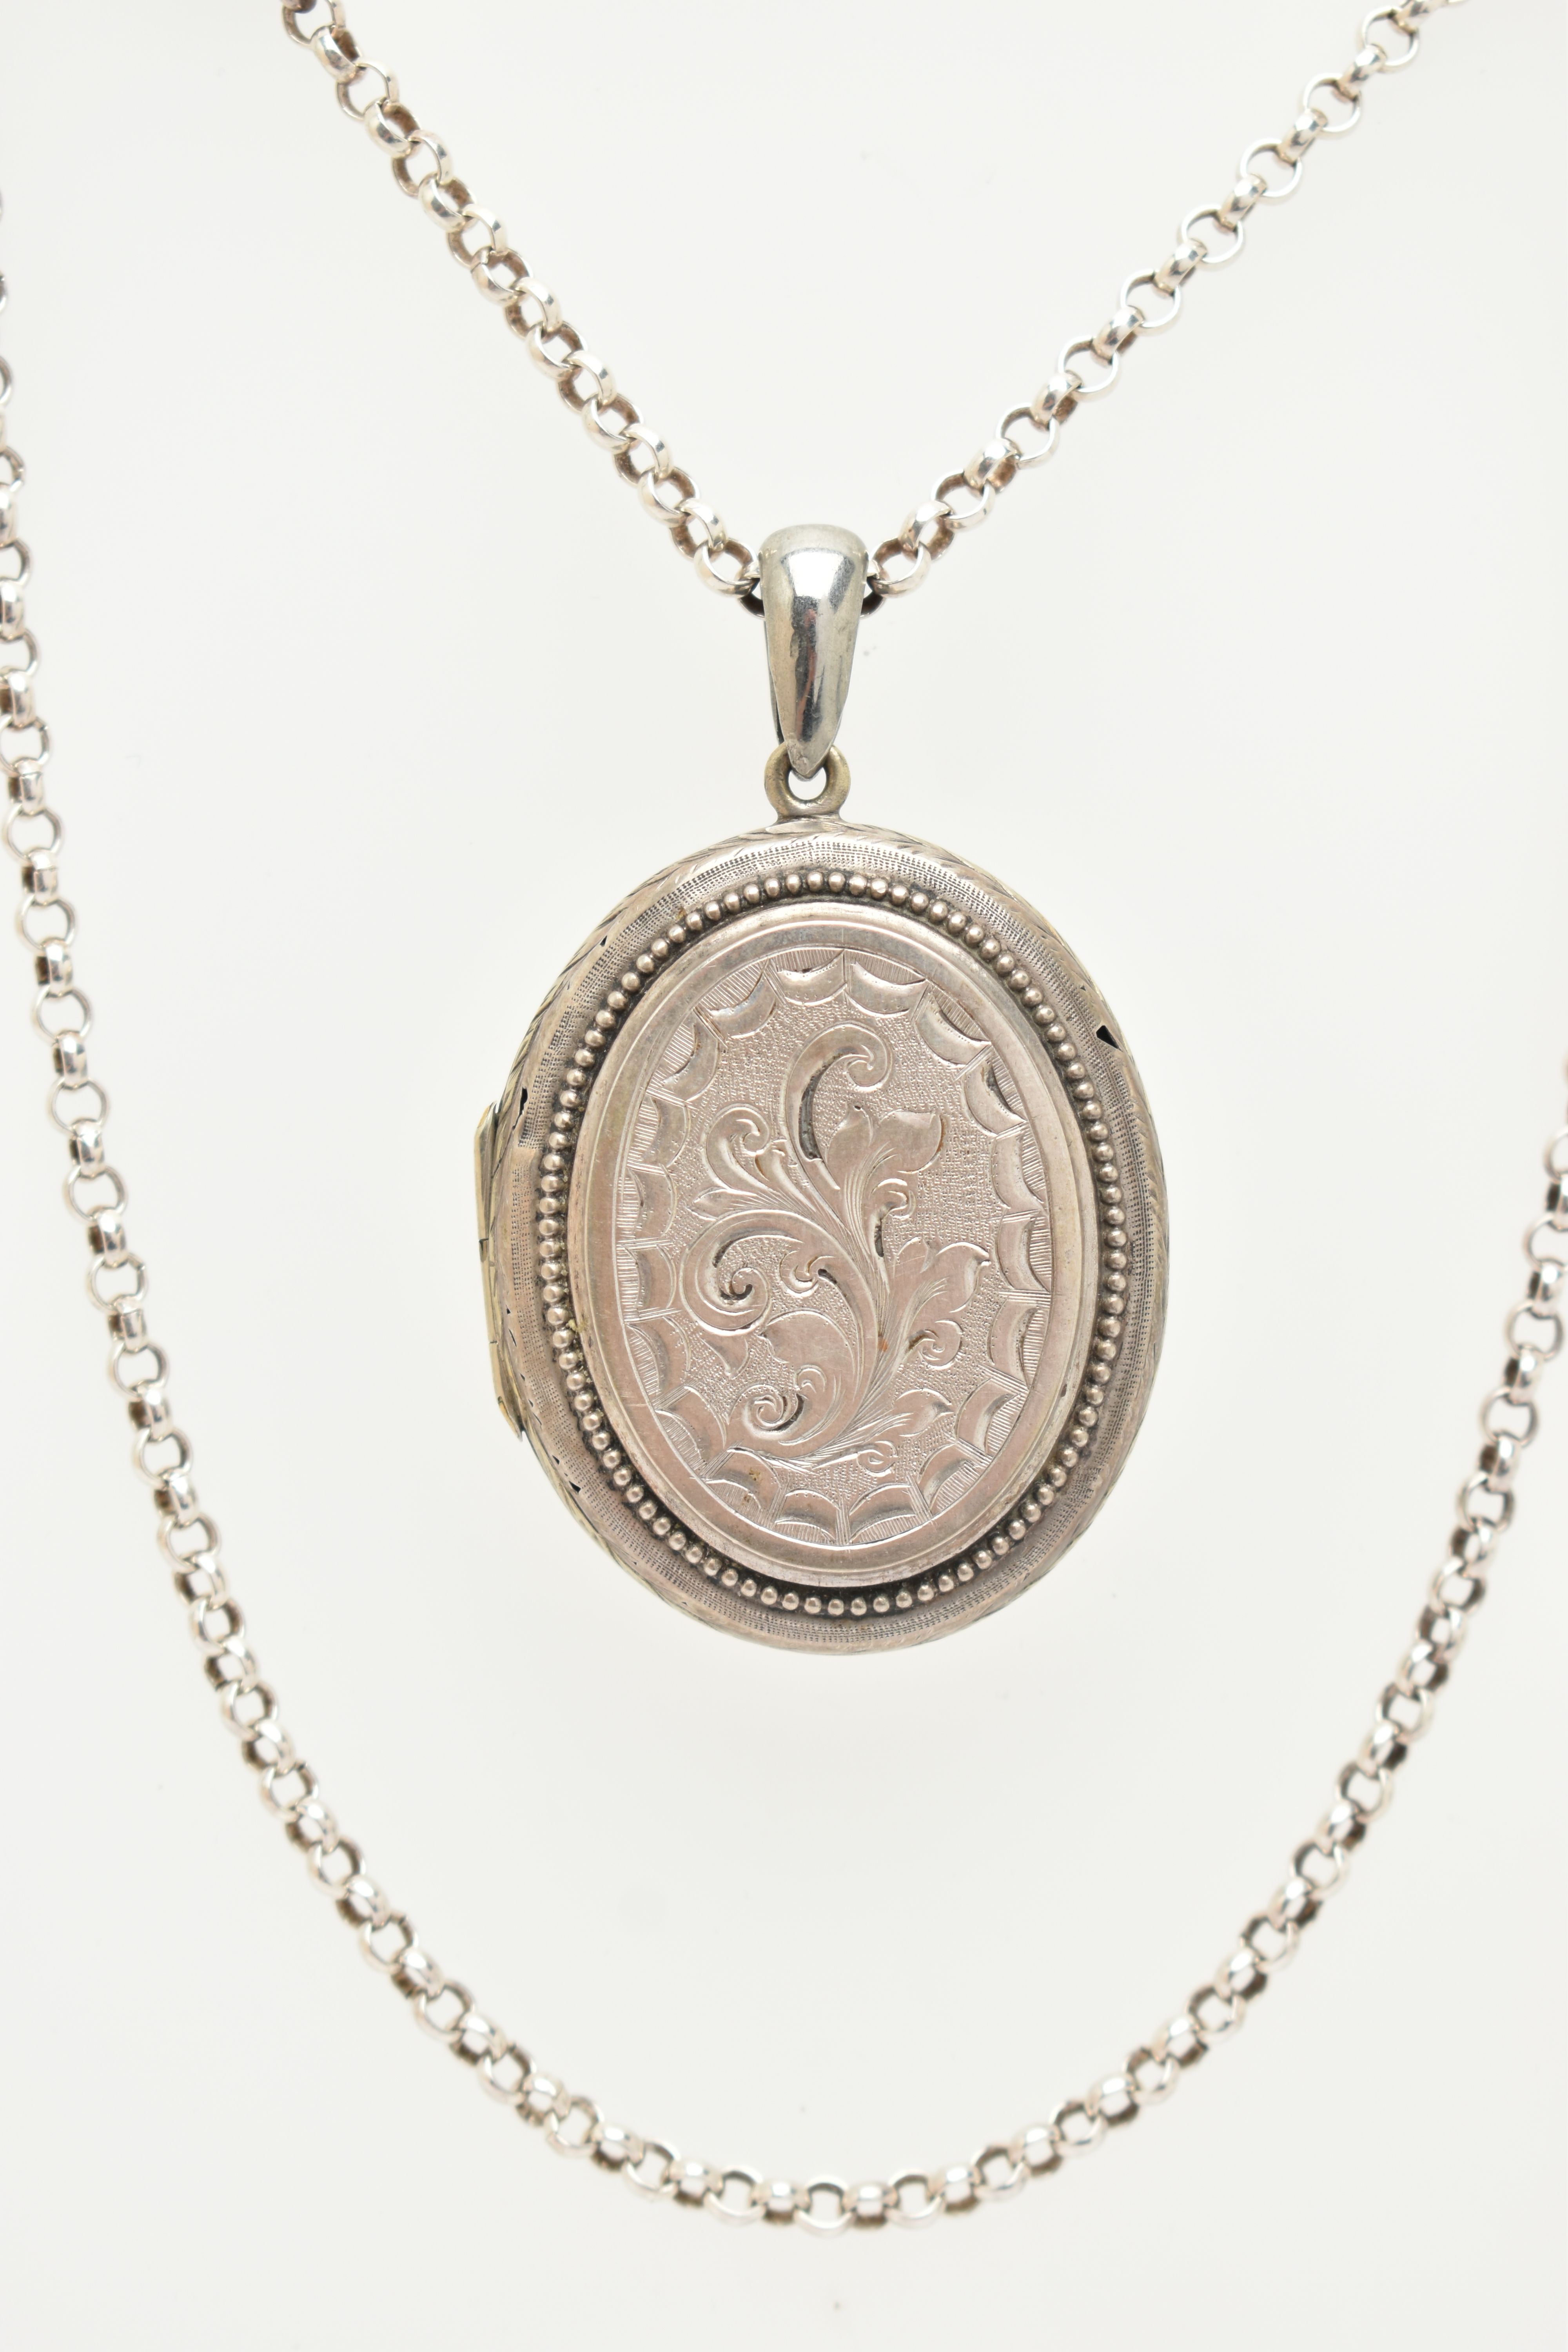 A LOCKET AND A CHAIN, a base metal oval locket with embossed floral and acanthus detail, together